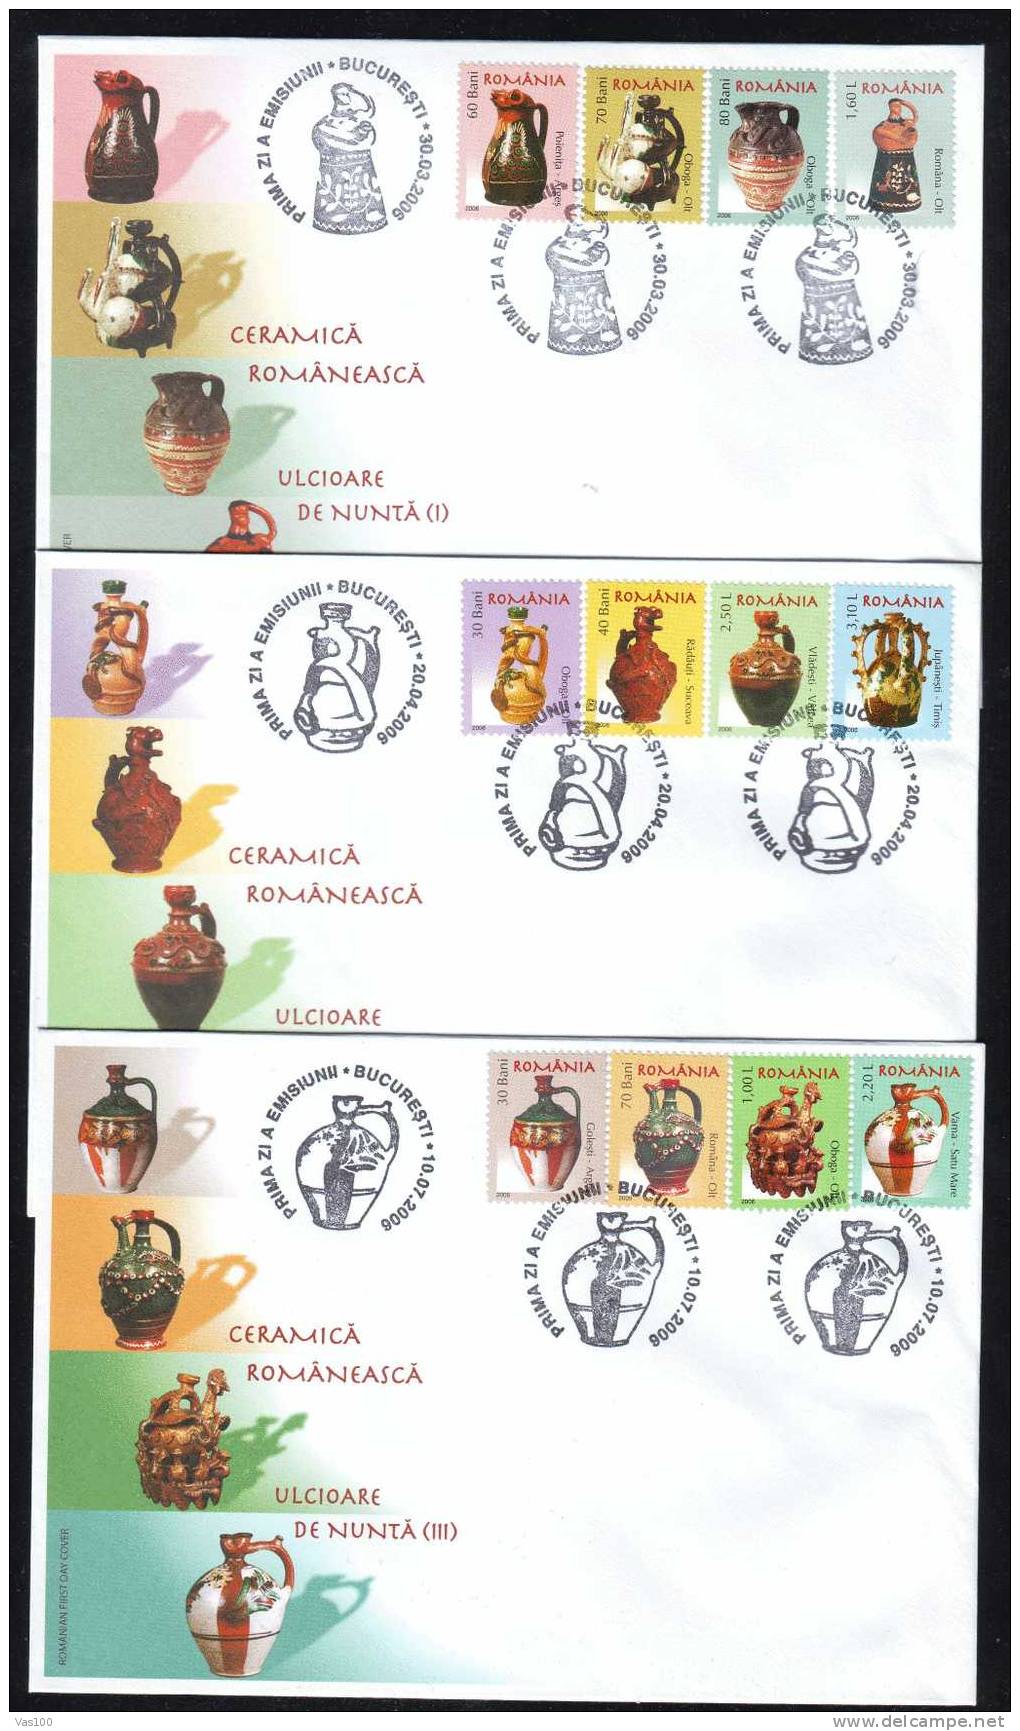 Ceramics, Porcelain From All Romanian Regions 2006 FDC 3 Covers Rare! - Romania. - FDC